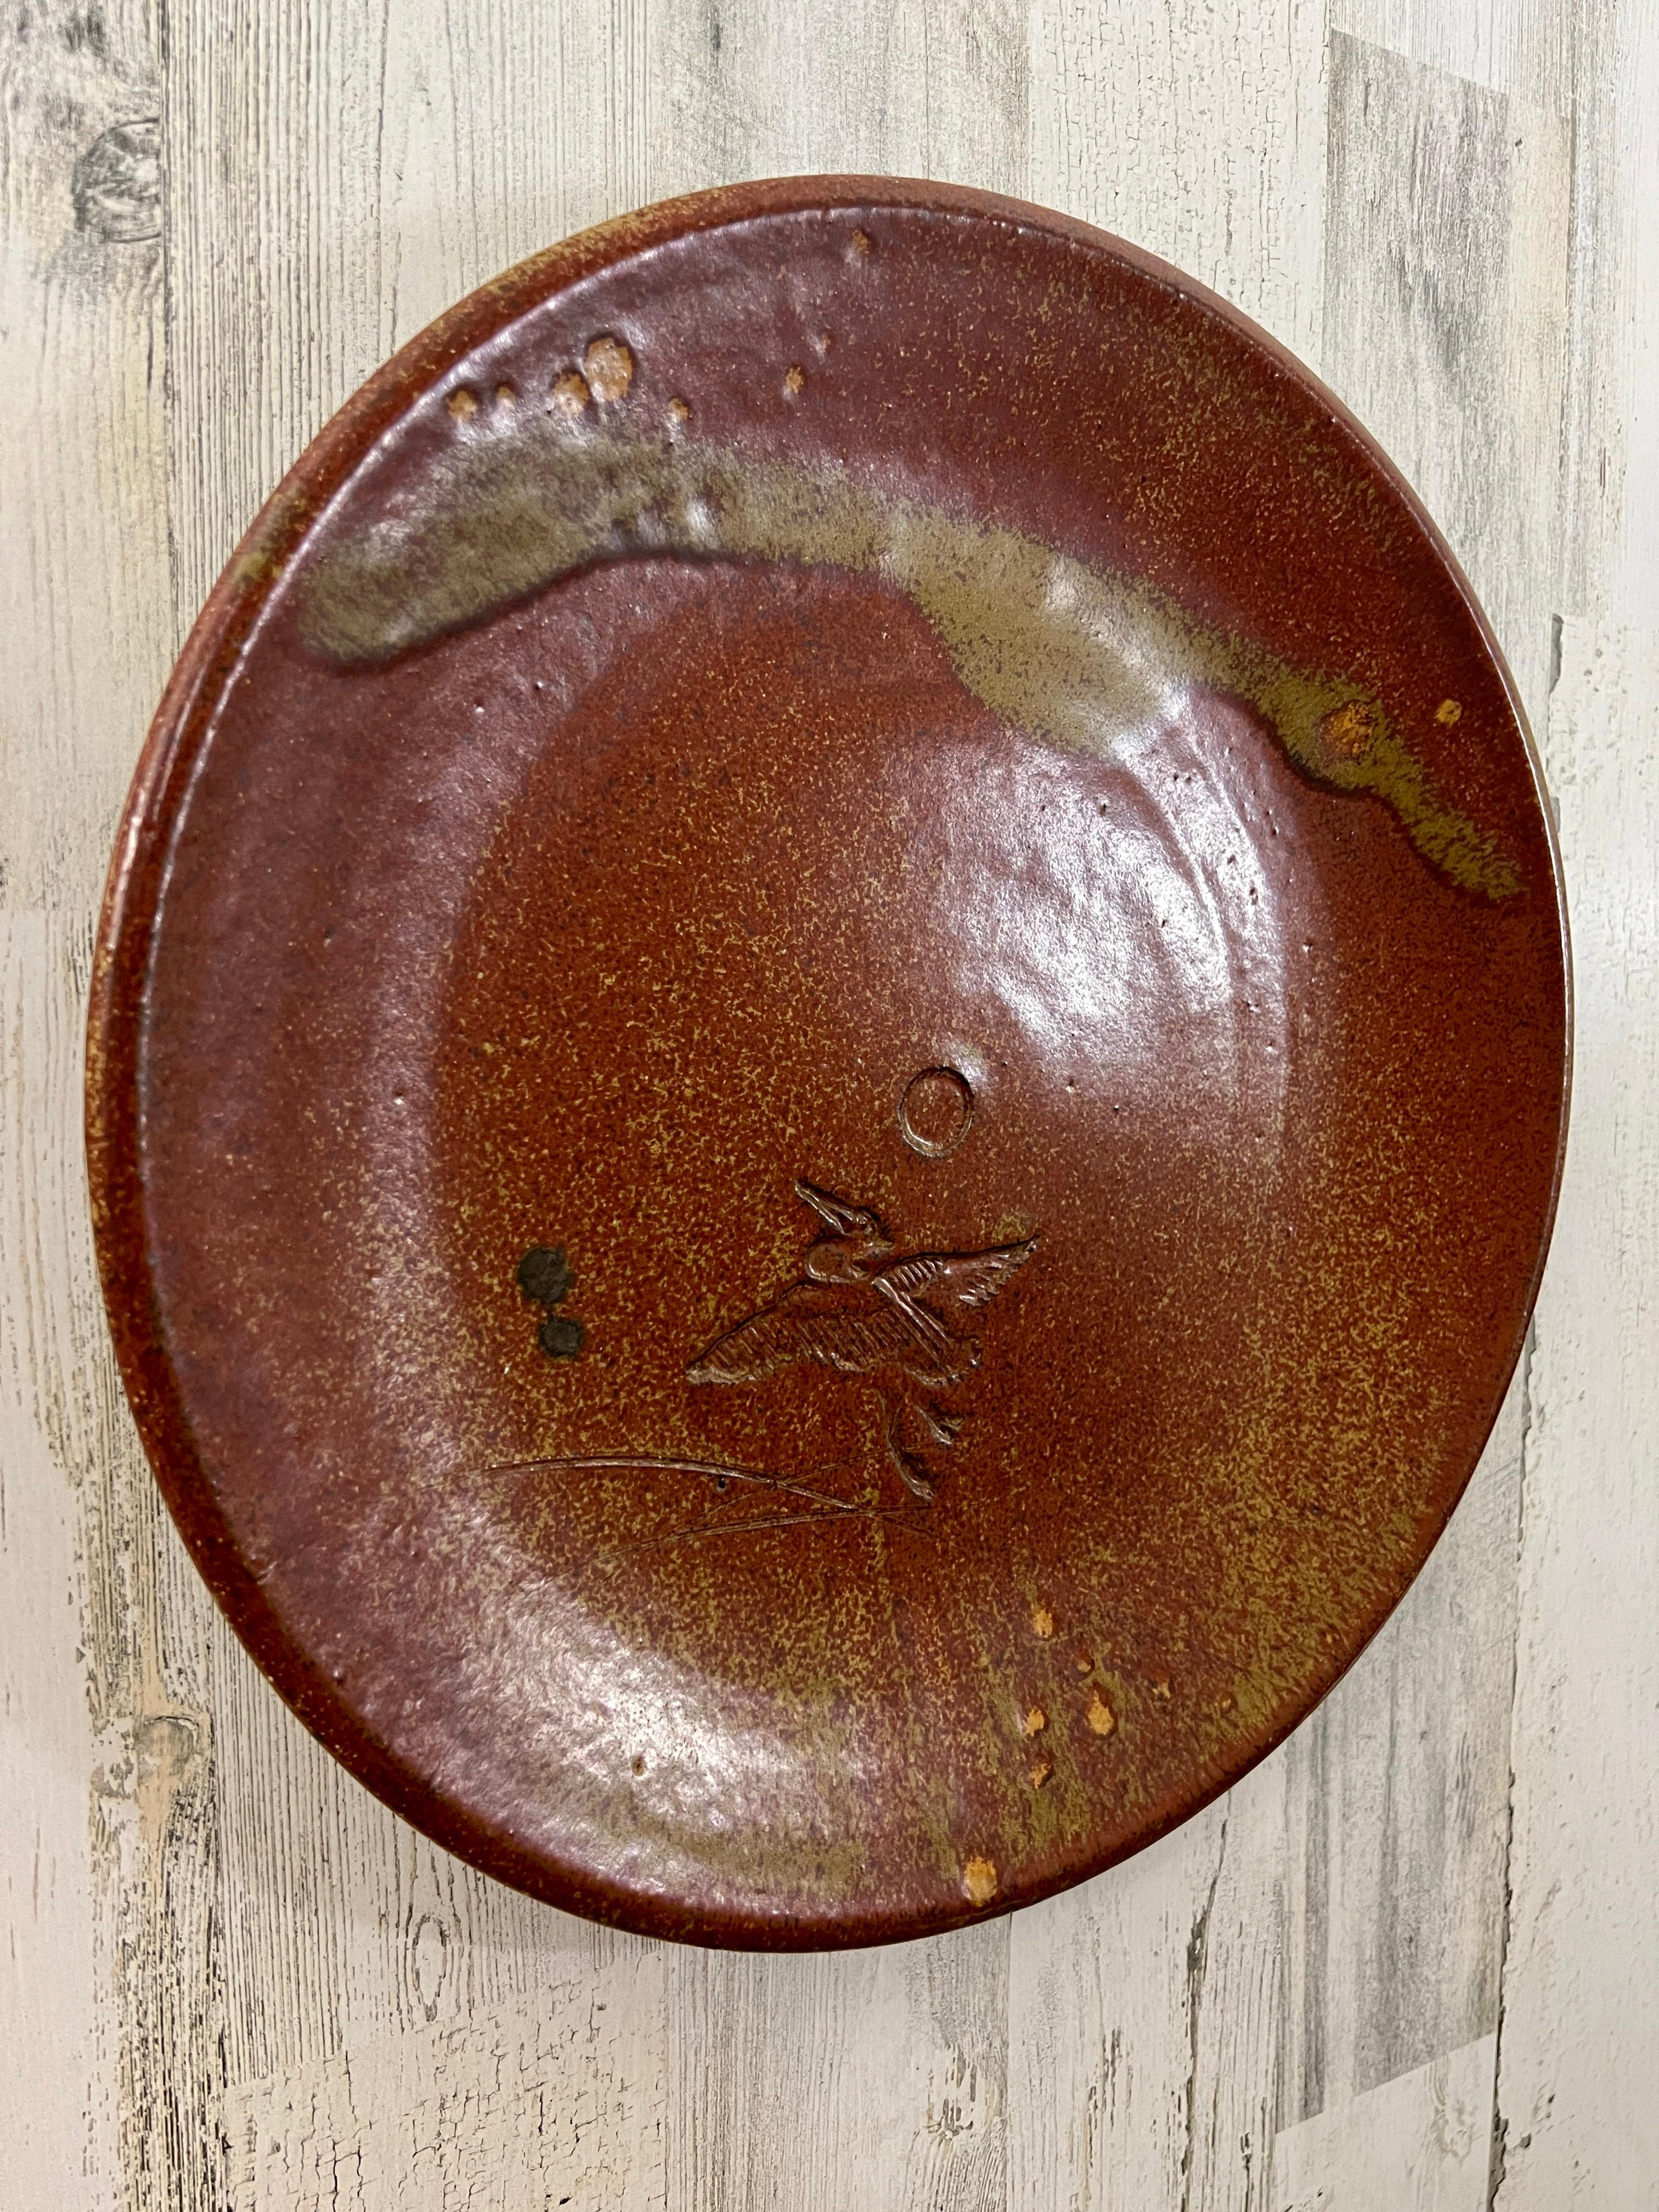 Ceramic charger with bird and sun design embossed into lower front of the plate. Signed and stamped on the backside.